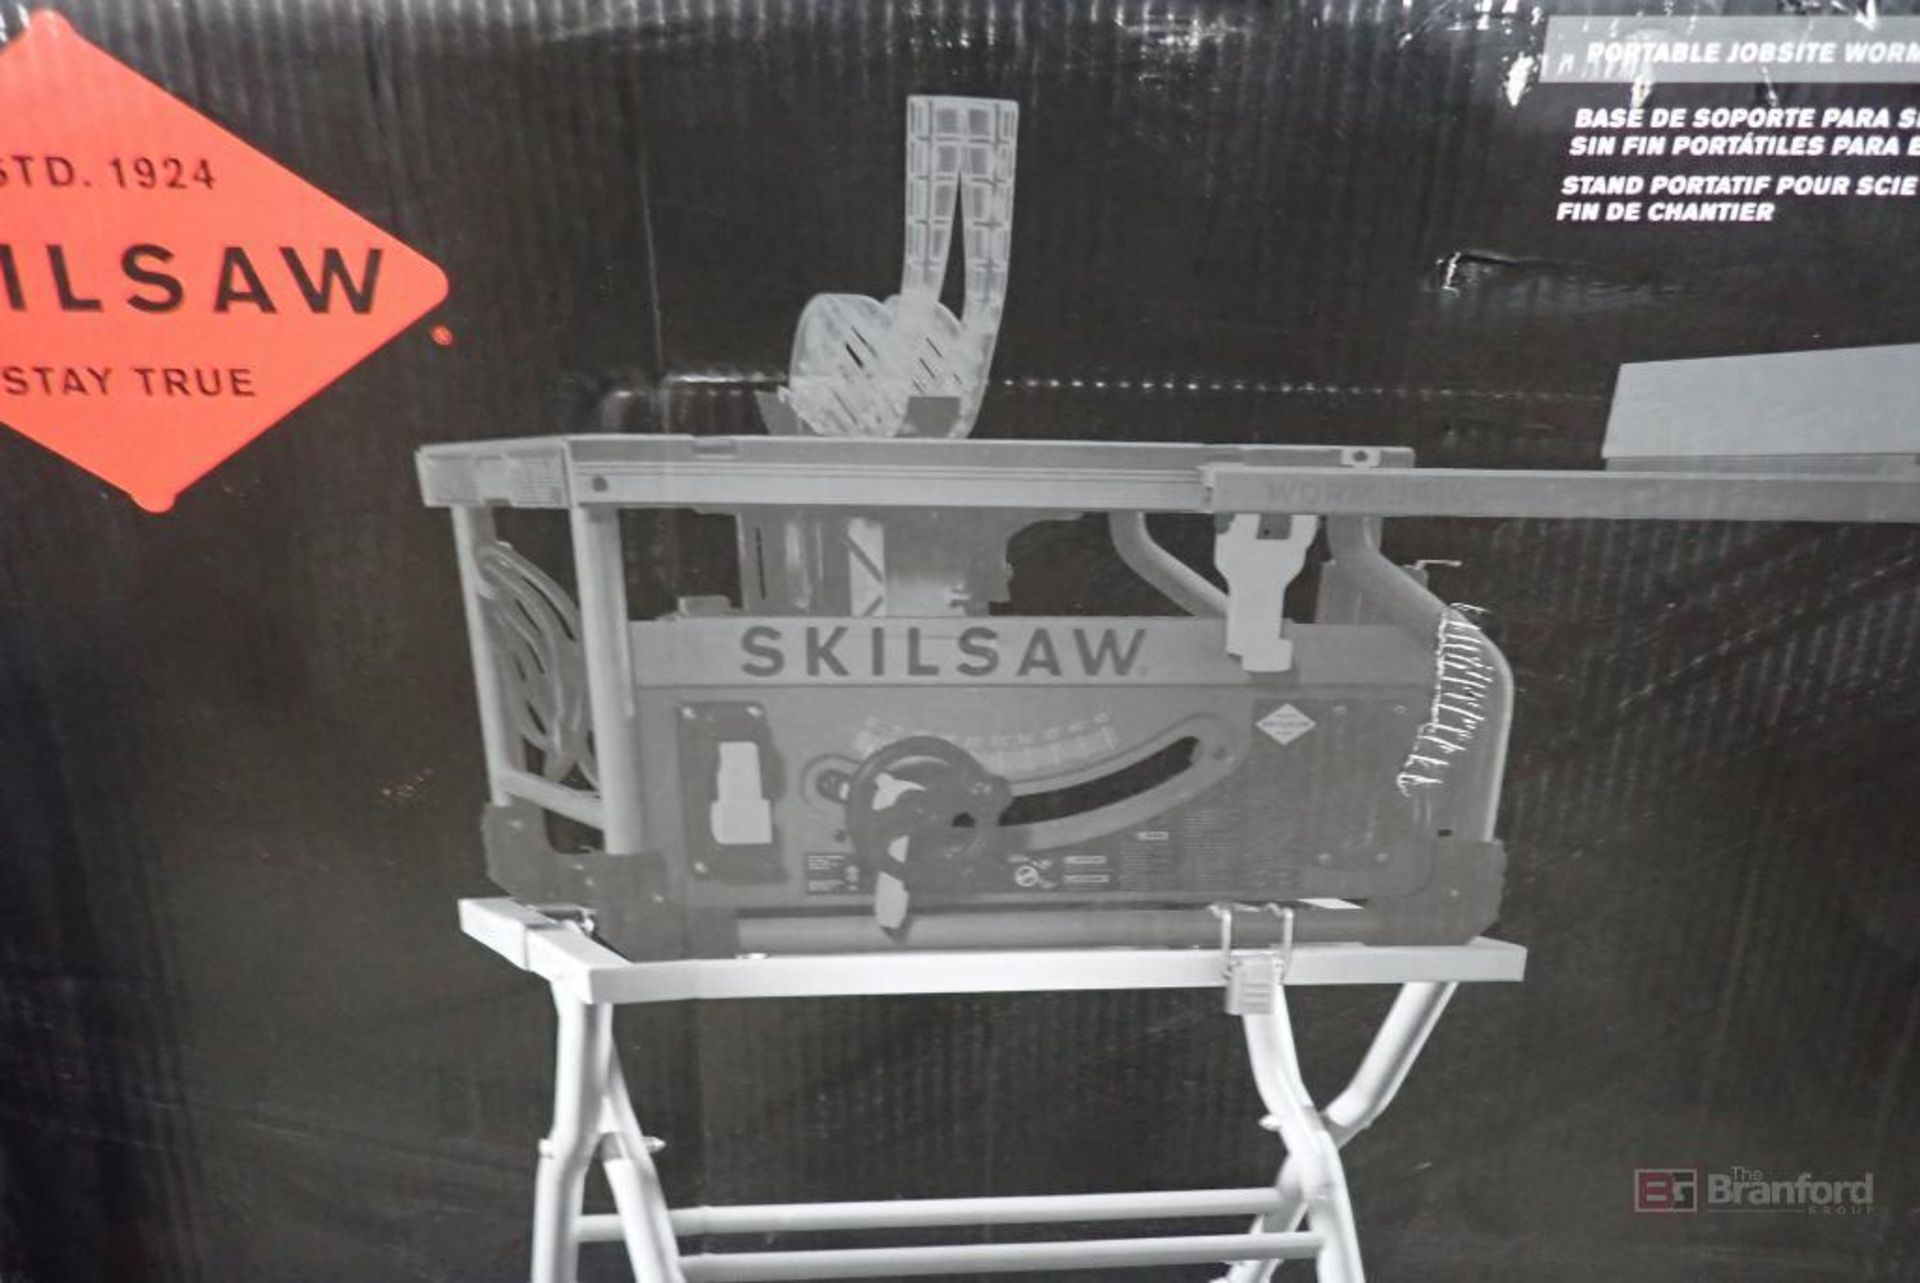 SKILSAW SPTA-70-WT-ST Portable Jobsite Worm Drive Table Saw Stand - Image 2 of 3